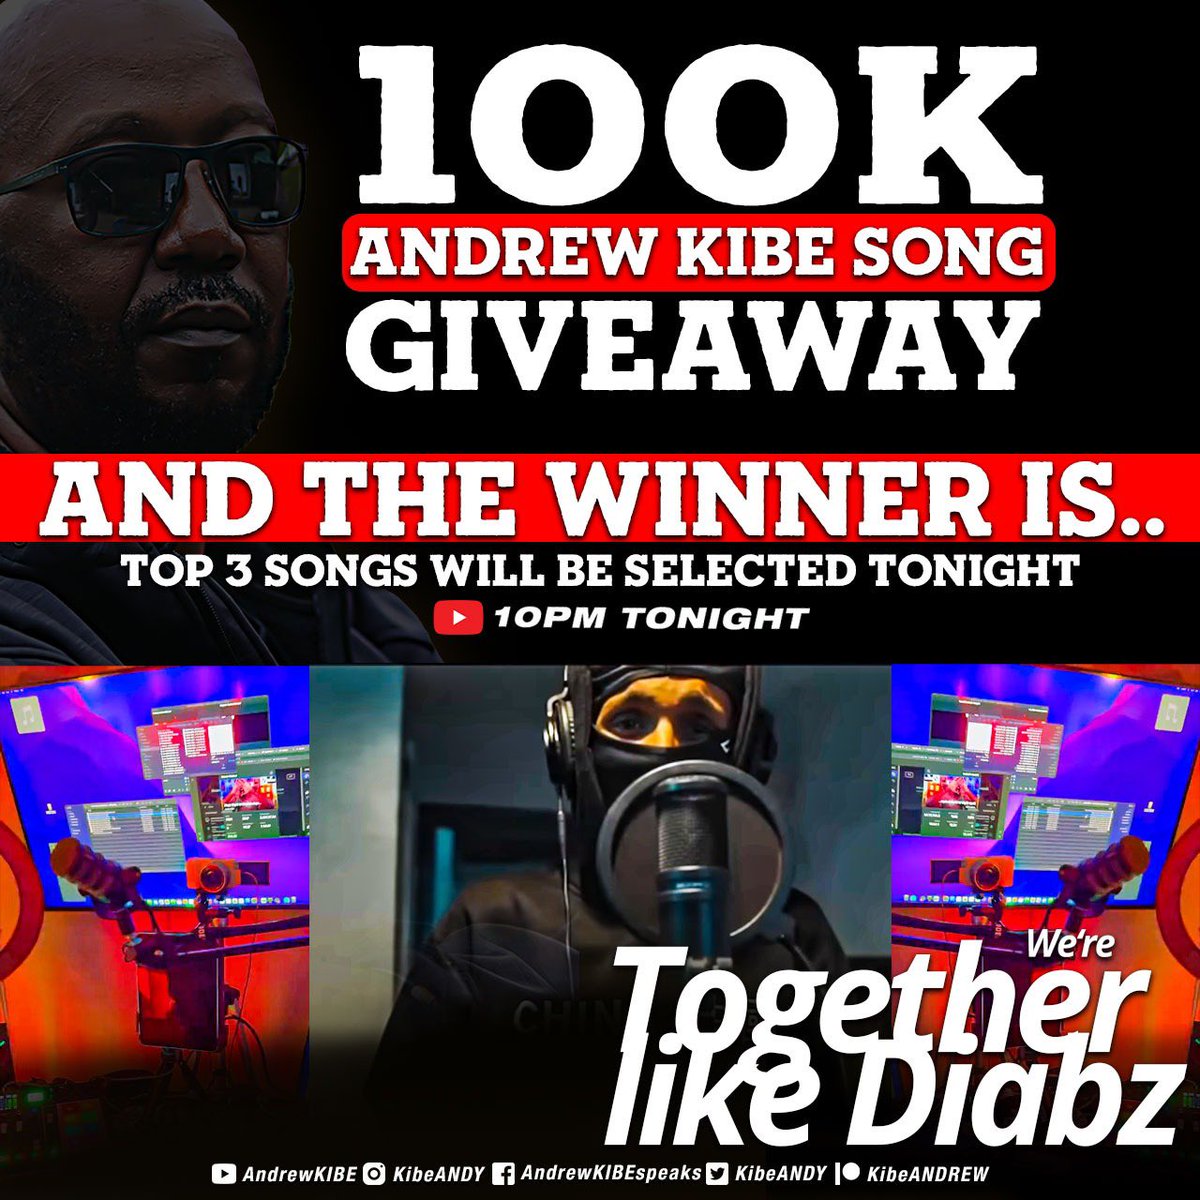 Tonight, one talented musician will walk away with 100k from me. Join me at 10pm on all my soshals